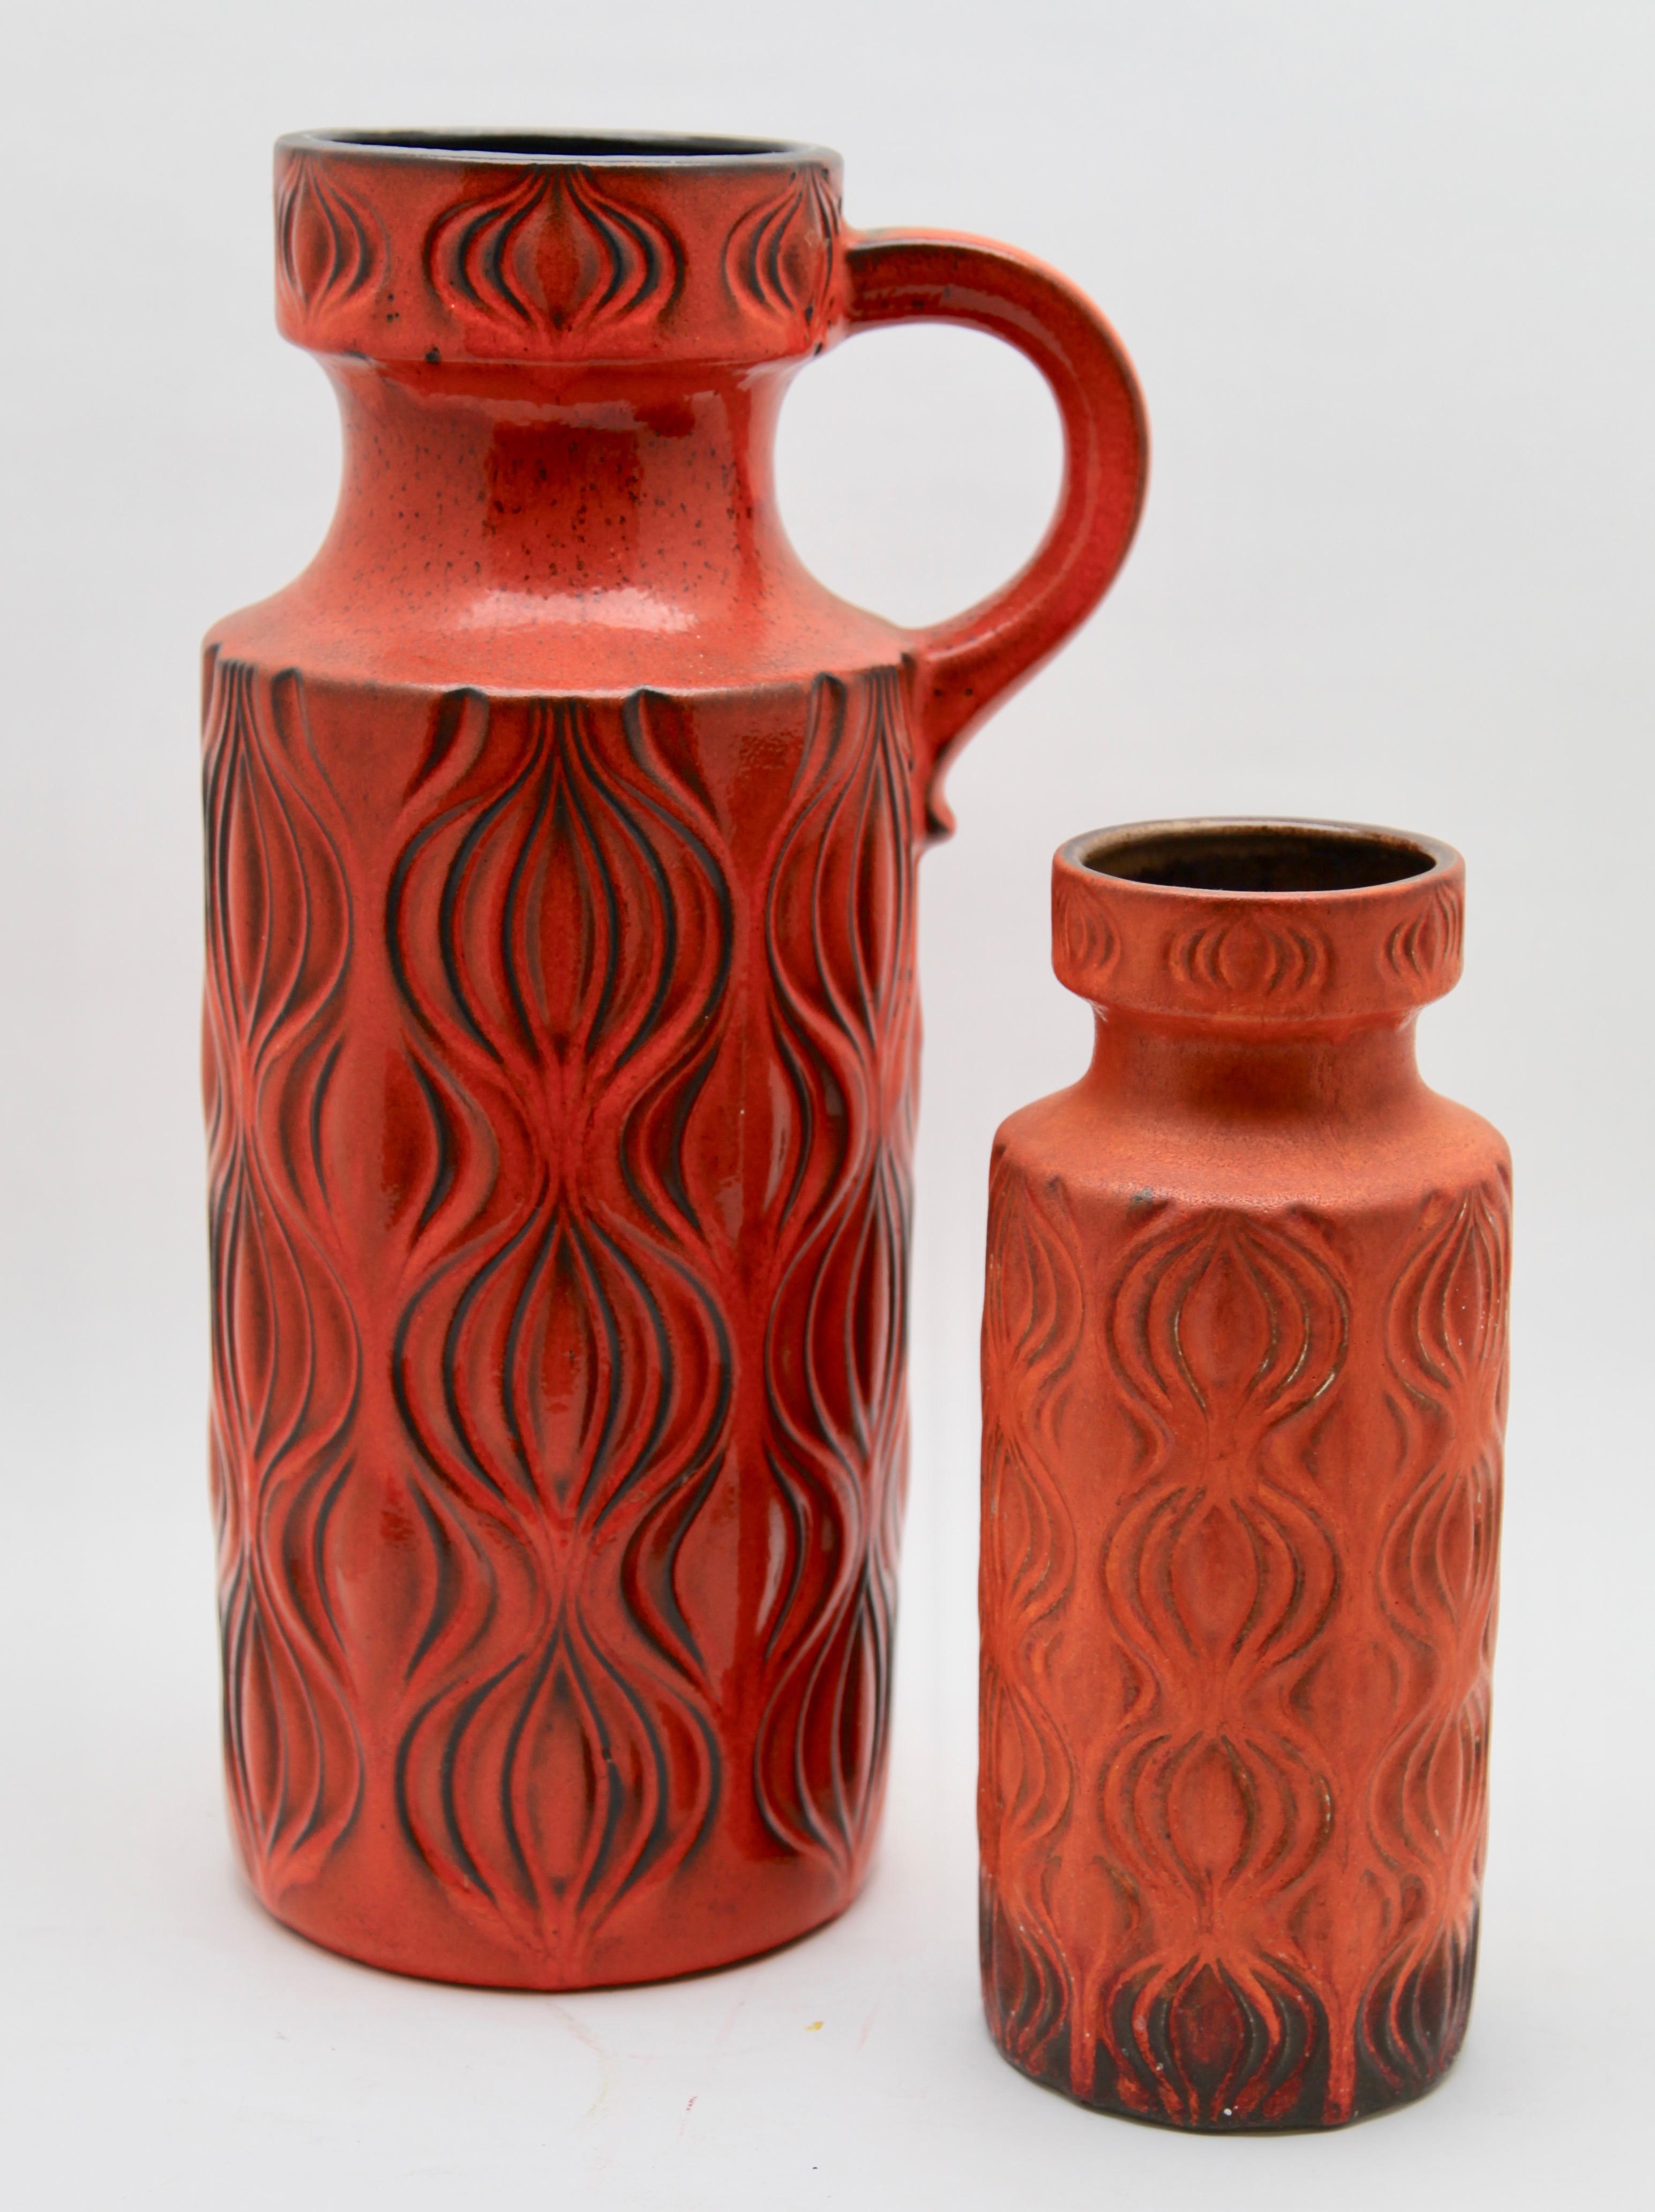 Scheurich vases in orange glaze featuring the indented pattern 'Amsterdam', (so named because the design was inspired by the map of Amsterdam's central canal system).
The larger vase has a glossy version of the glaze and the smaller one a matte